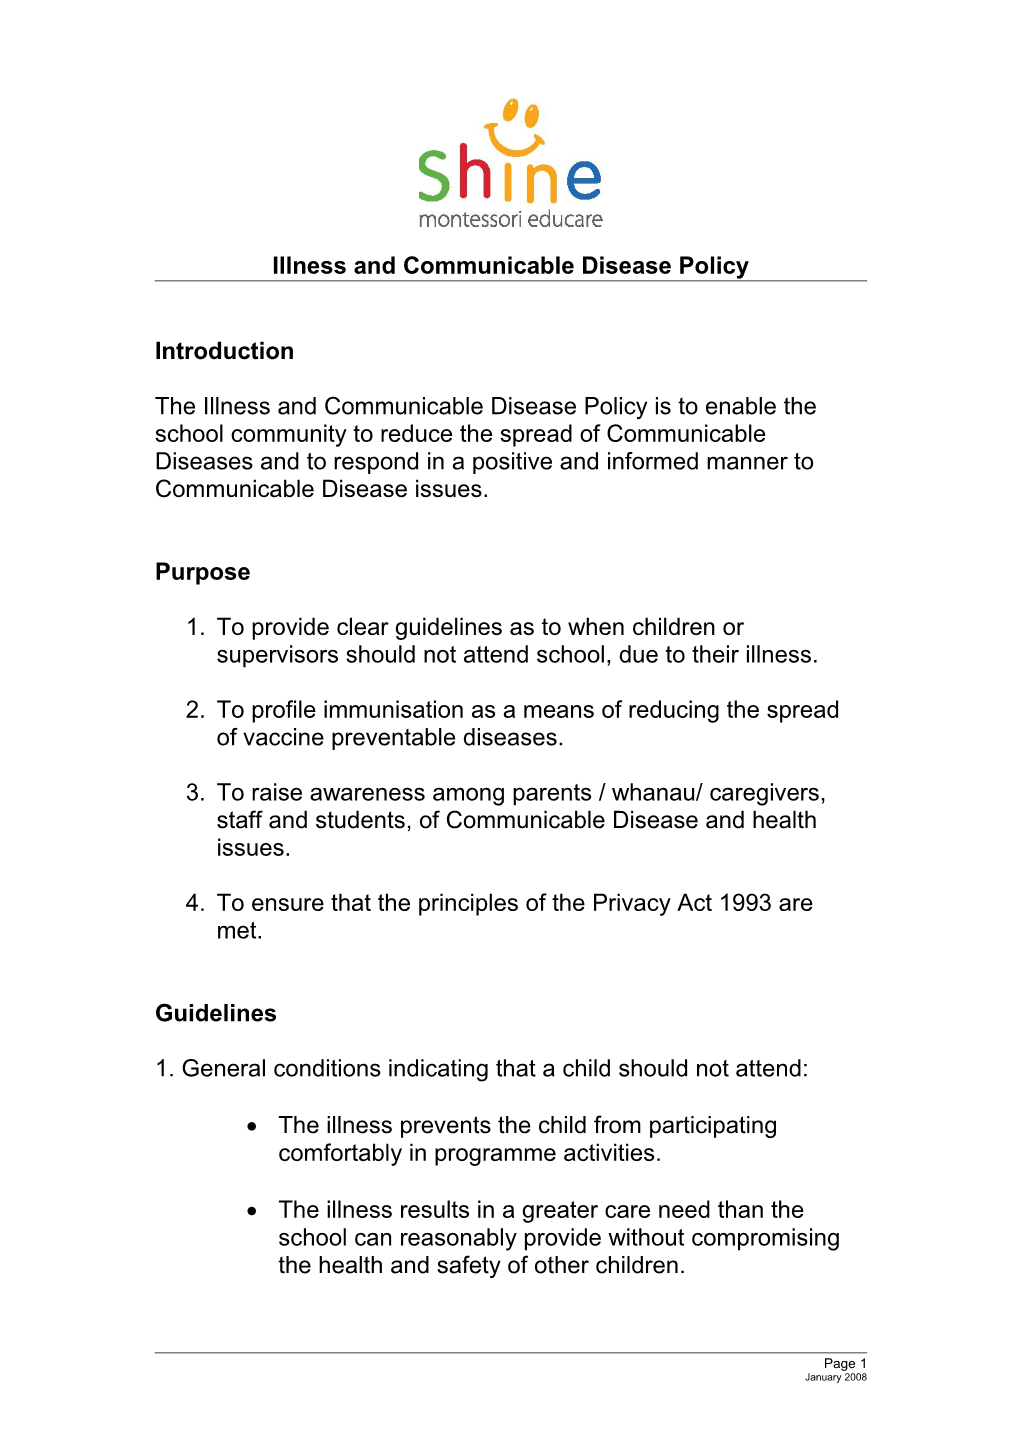 Illness and Communicable Disease Policy